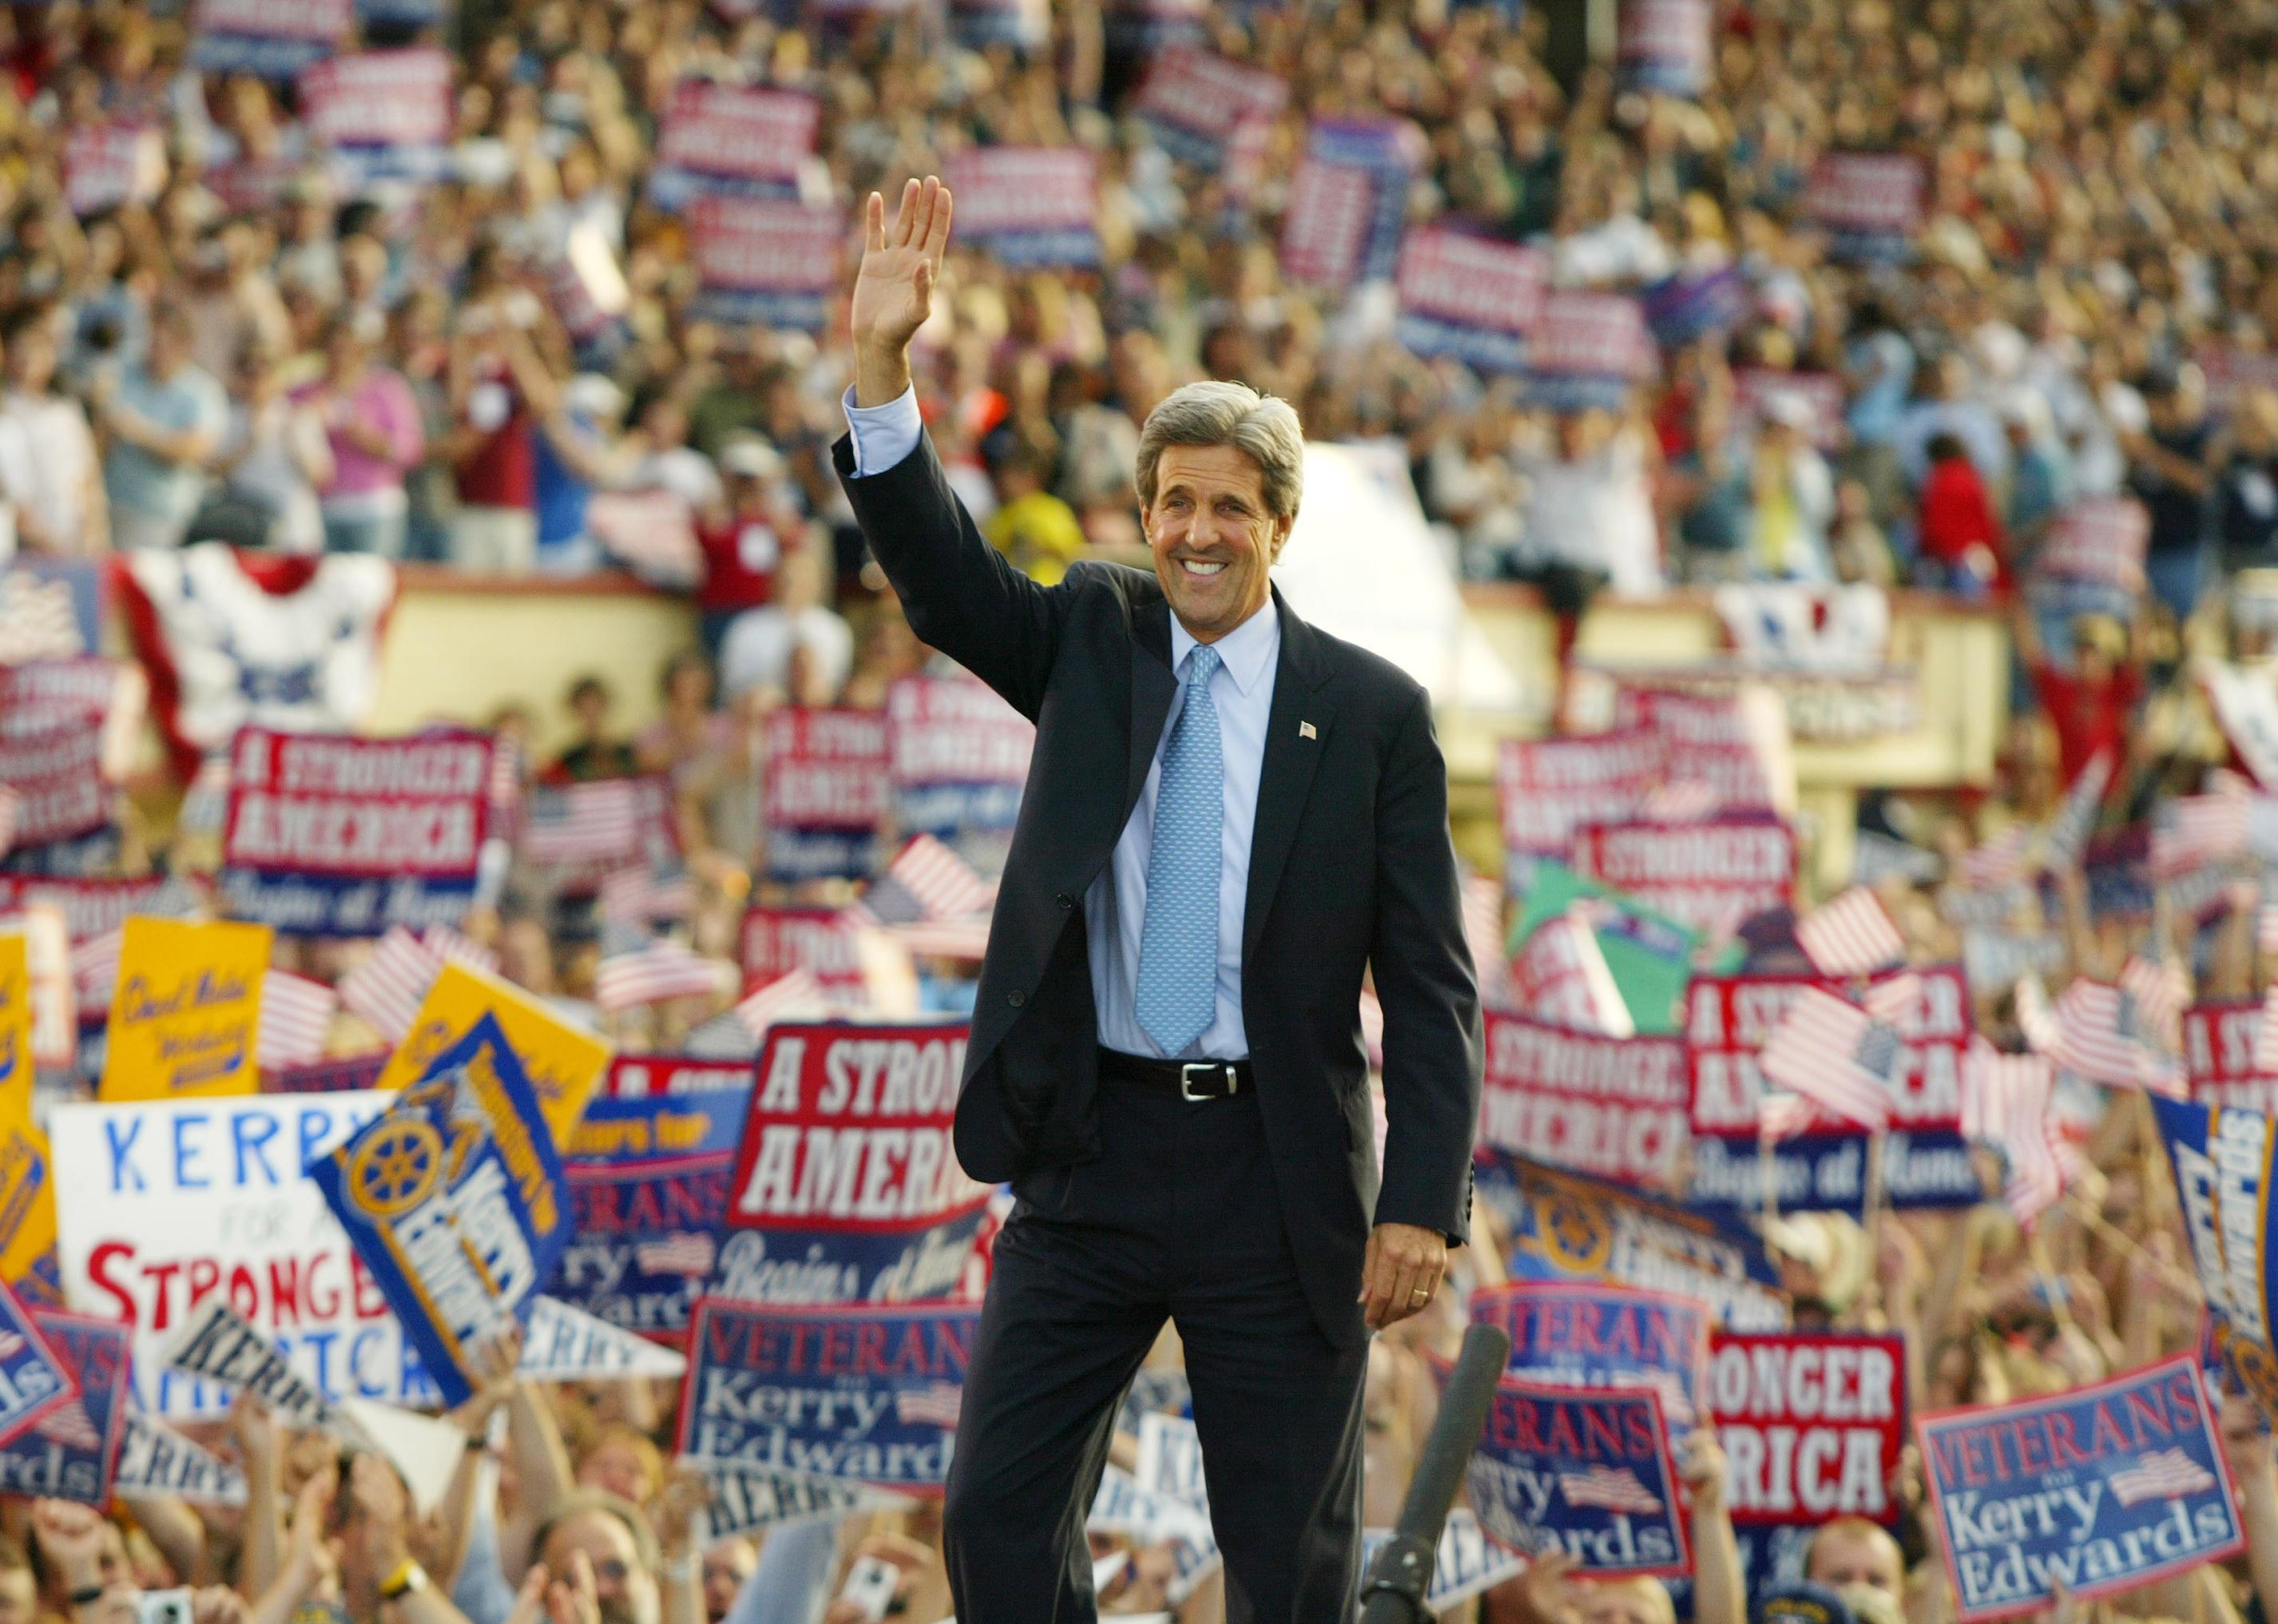 John Kerry waving during a campaign rally.